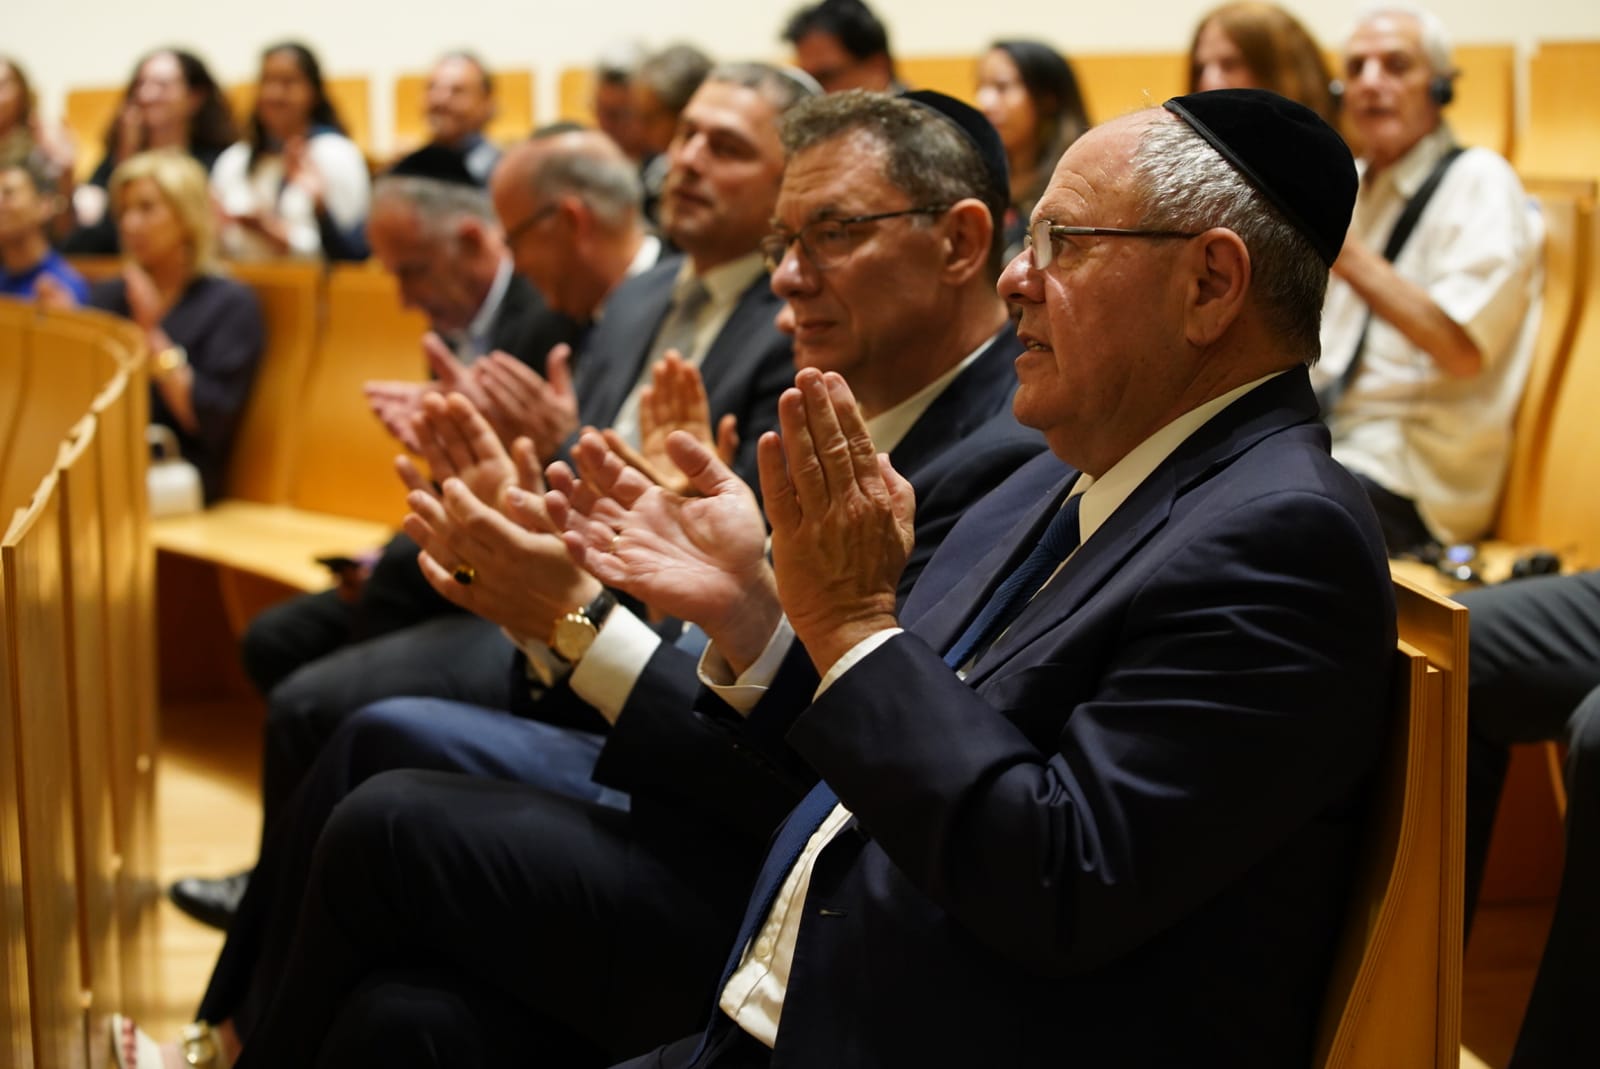 Dr. Albert Bourla attend a special performance of Ladino and Sephardic music in the Yad Vashem Synagogue 